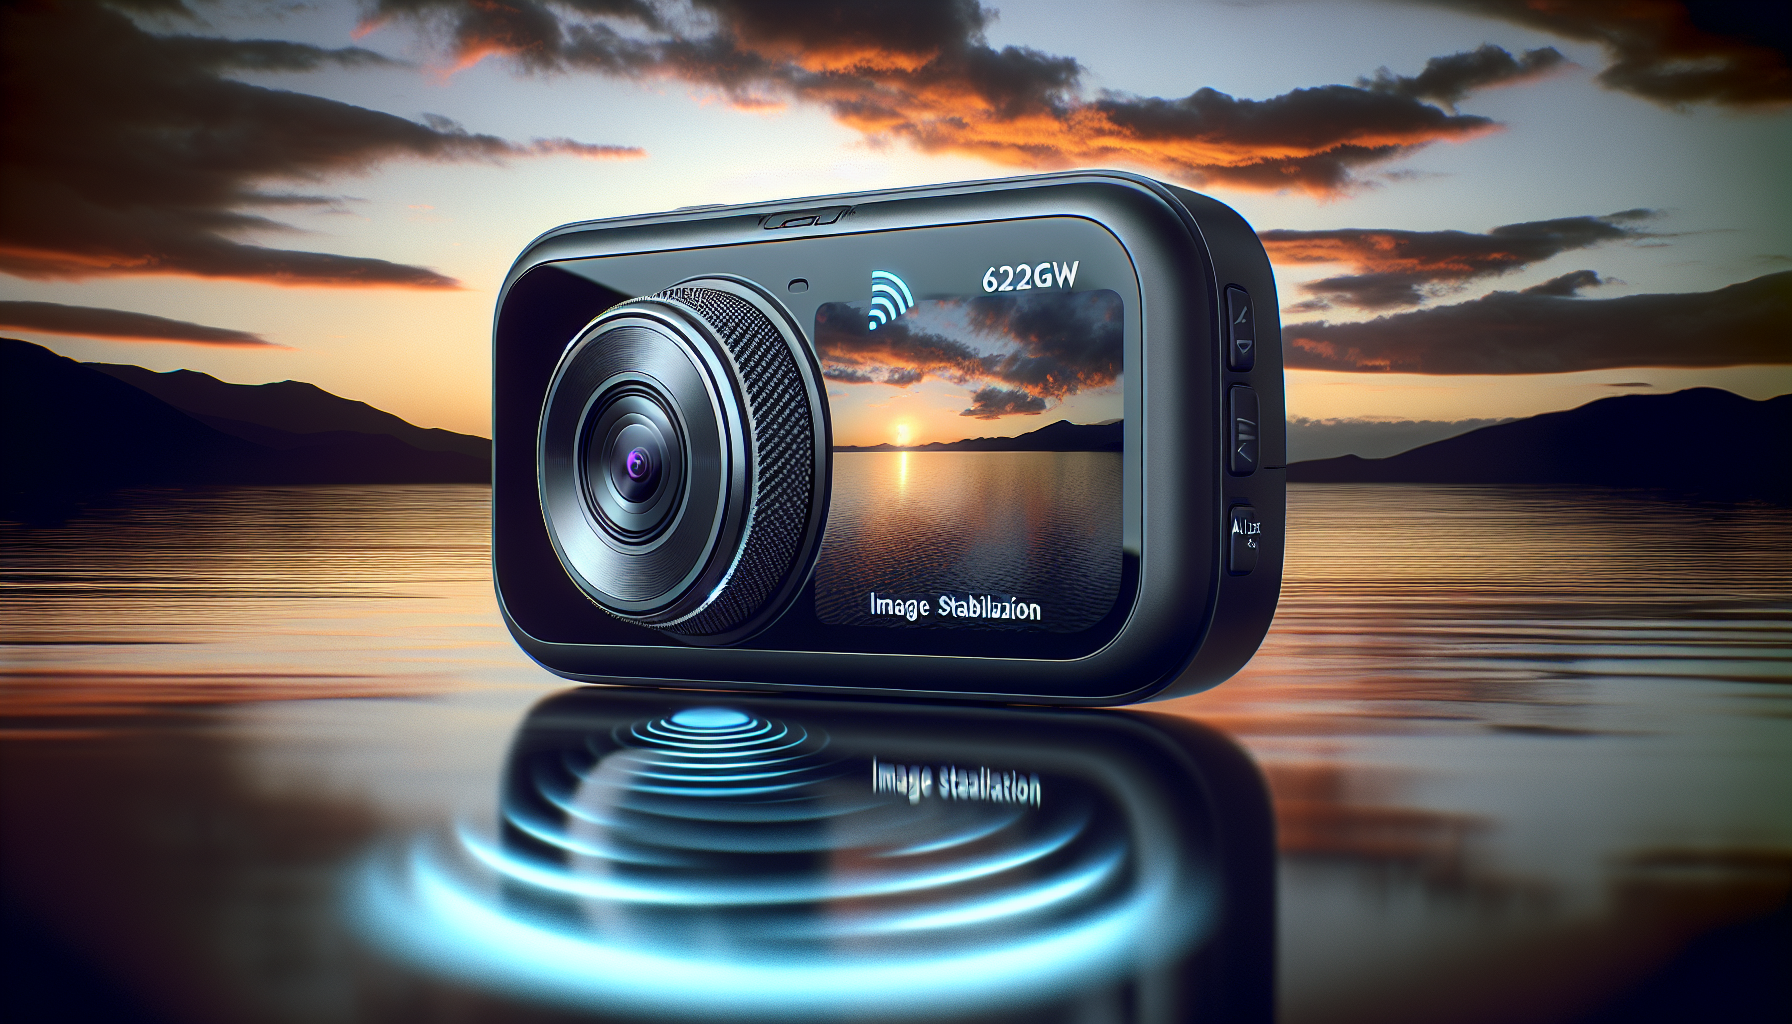 The Nextbase 622GW - best overall dash cam